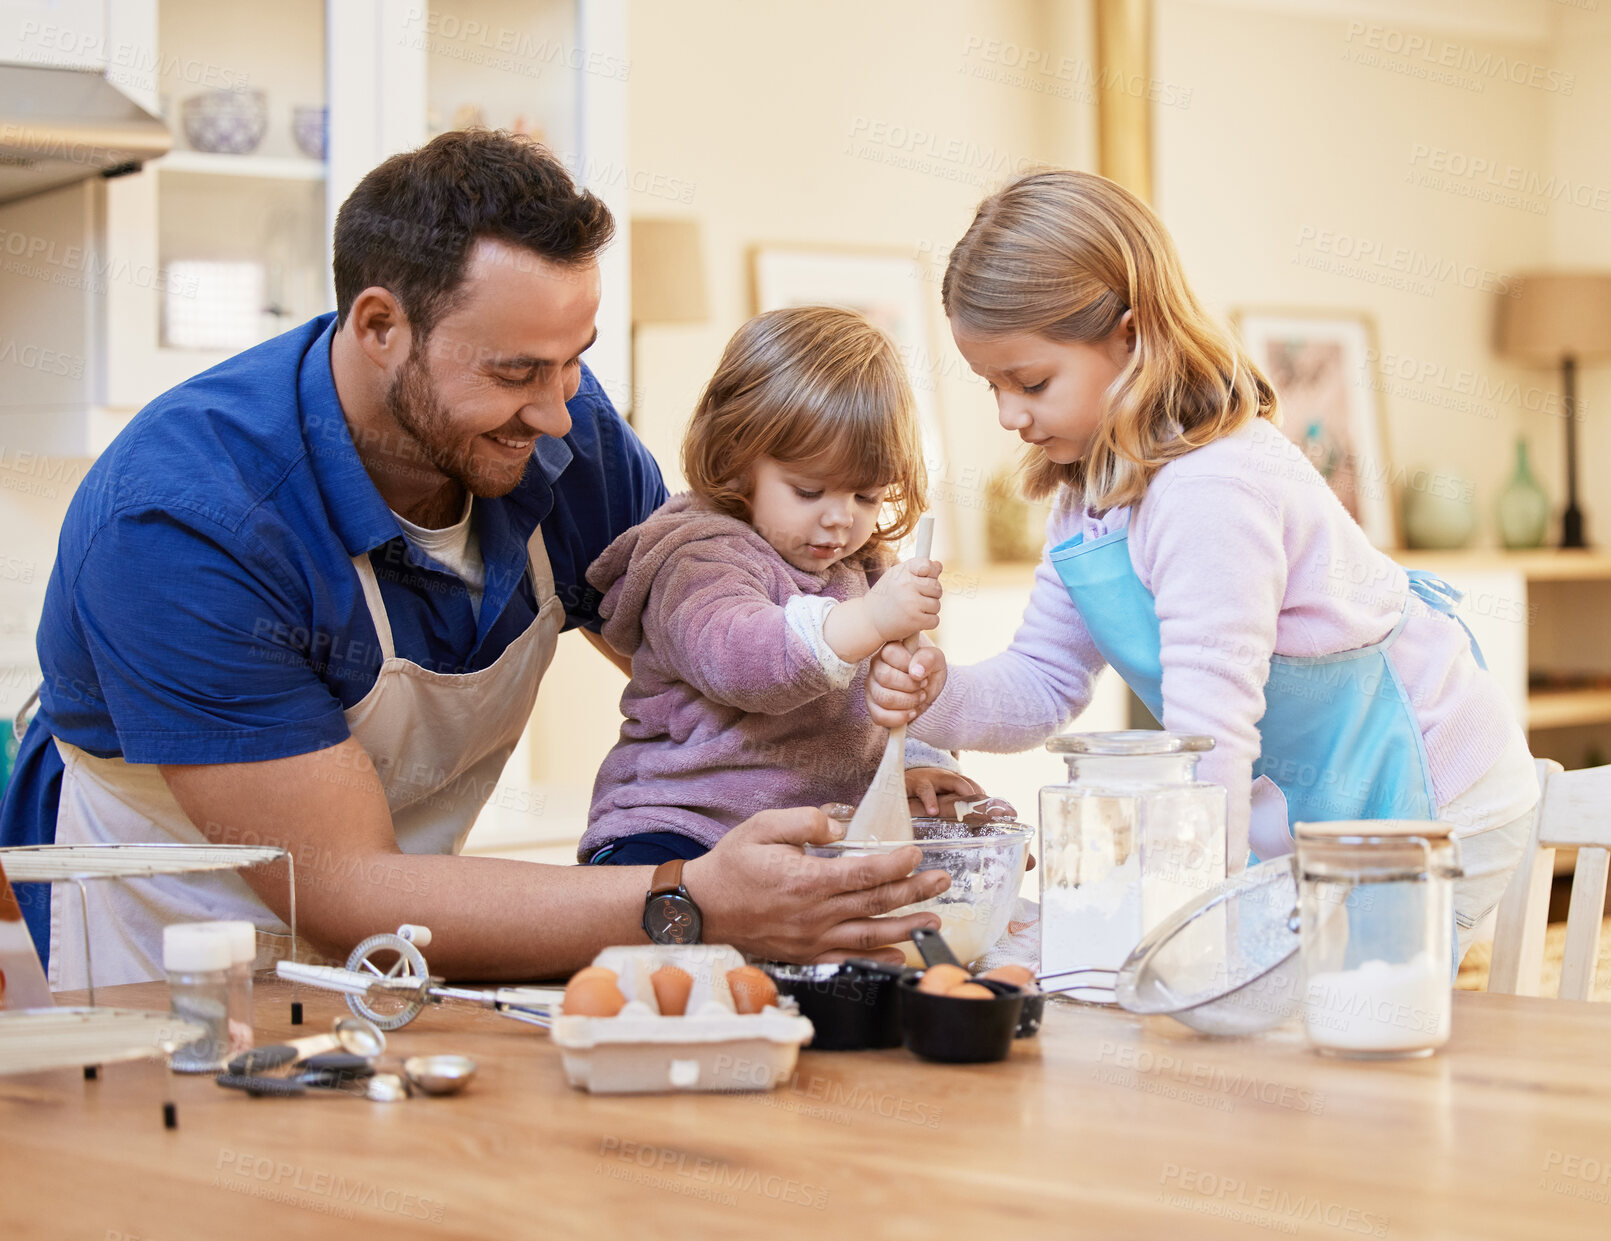 Buy stock photo Shot of a young father baking together while a little girl stirs a bowl of cake batter